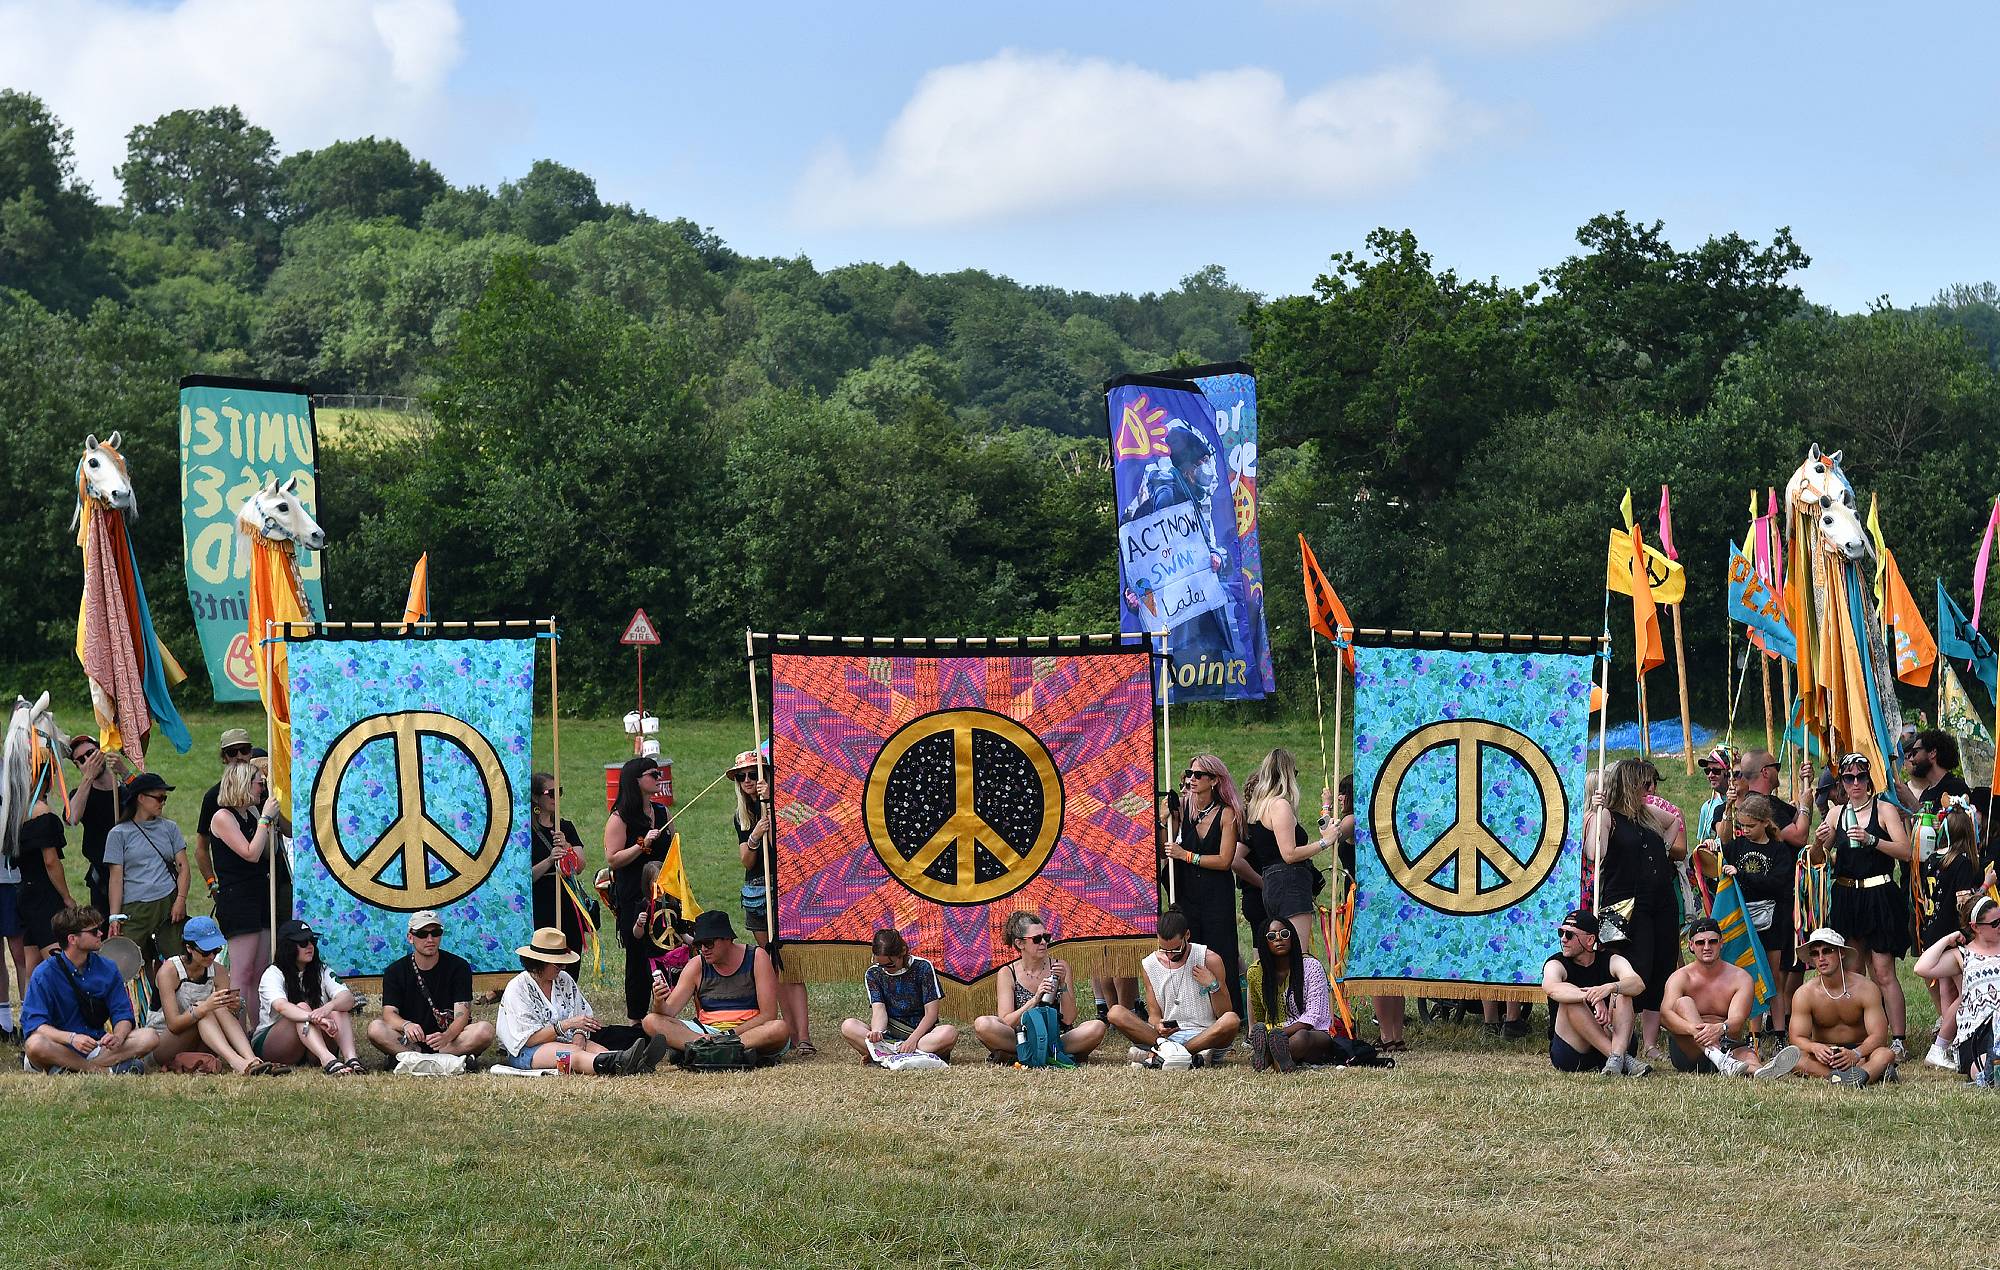 Festival goers participate in a peace procession during day 2 of Glastonbury Festival 2023 at Worthy Farm, Pilton on June 22, 2023 in Glastonbury, England. (Photo by Jim Dyson/Redferns)